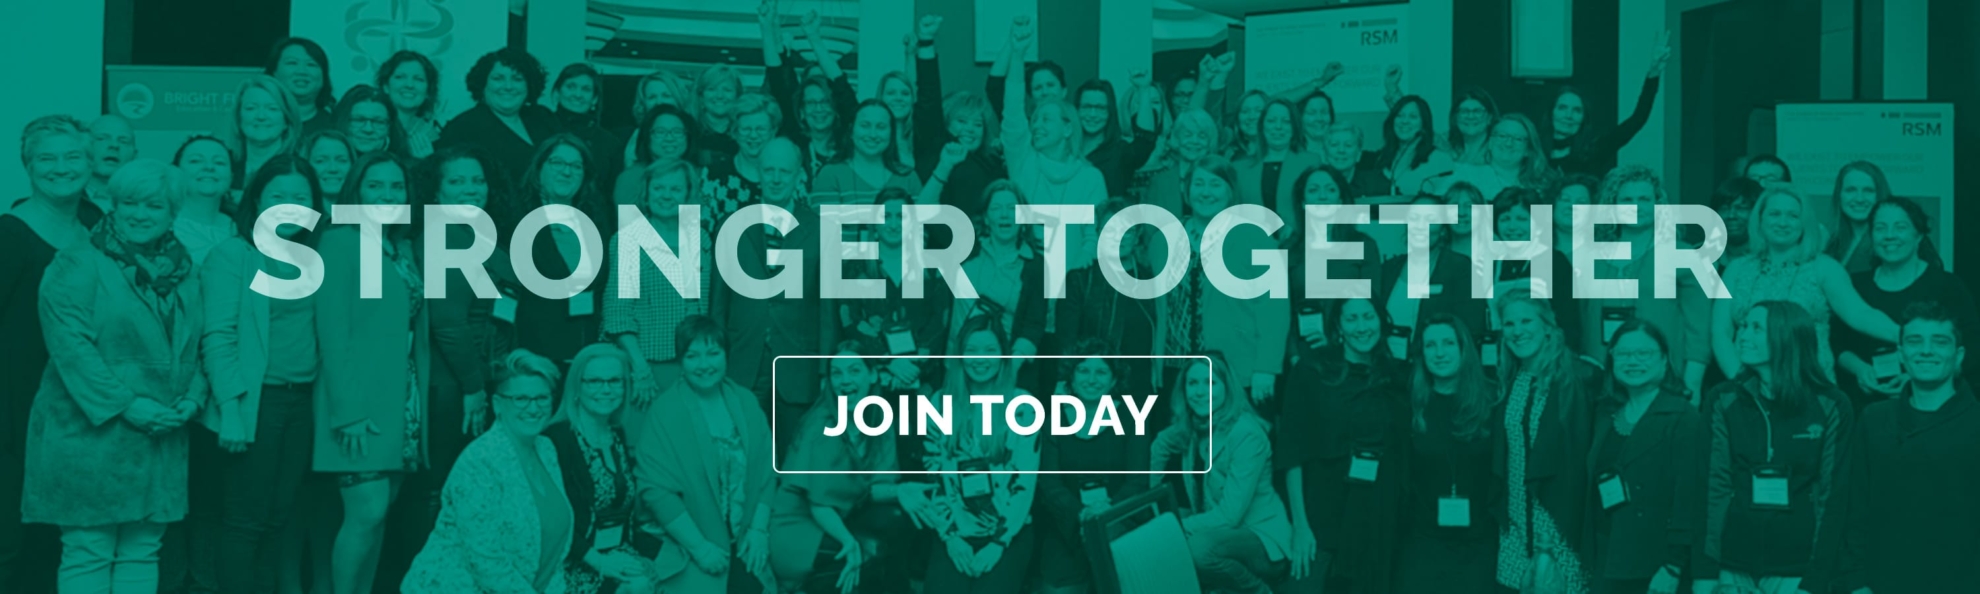 Stronger Together Join Today Teal